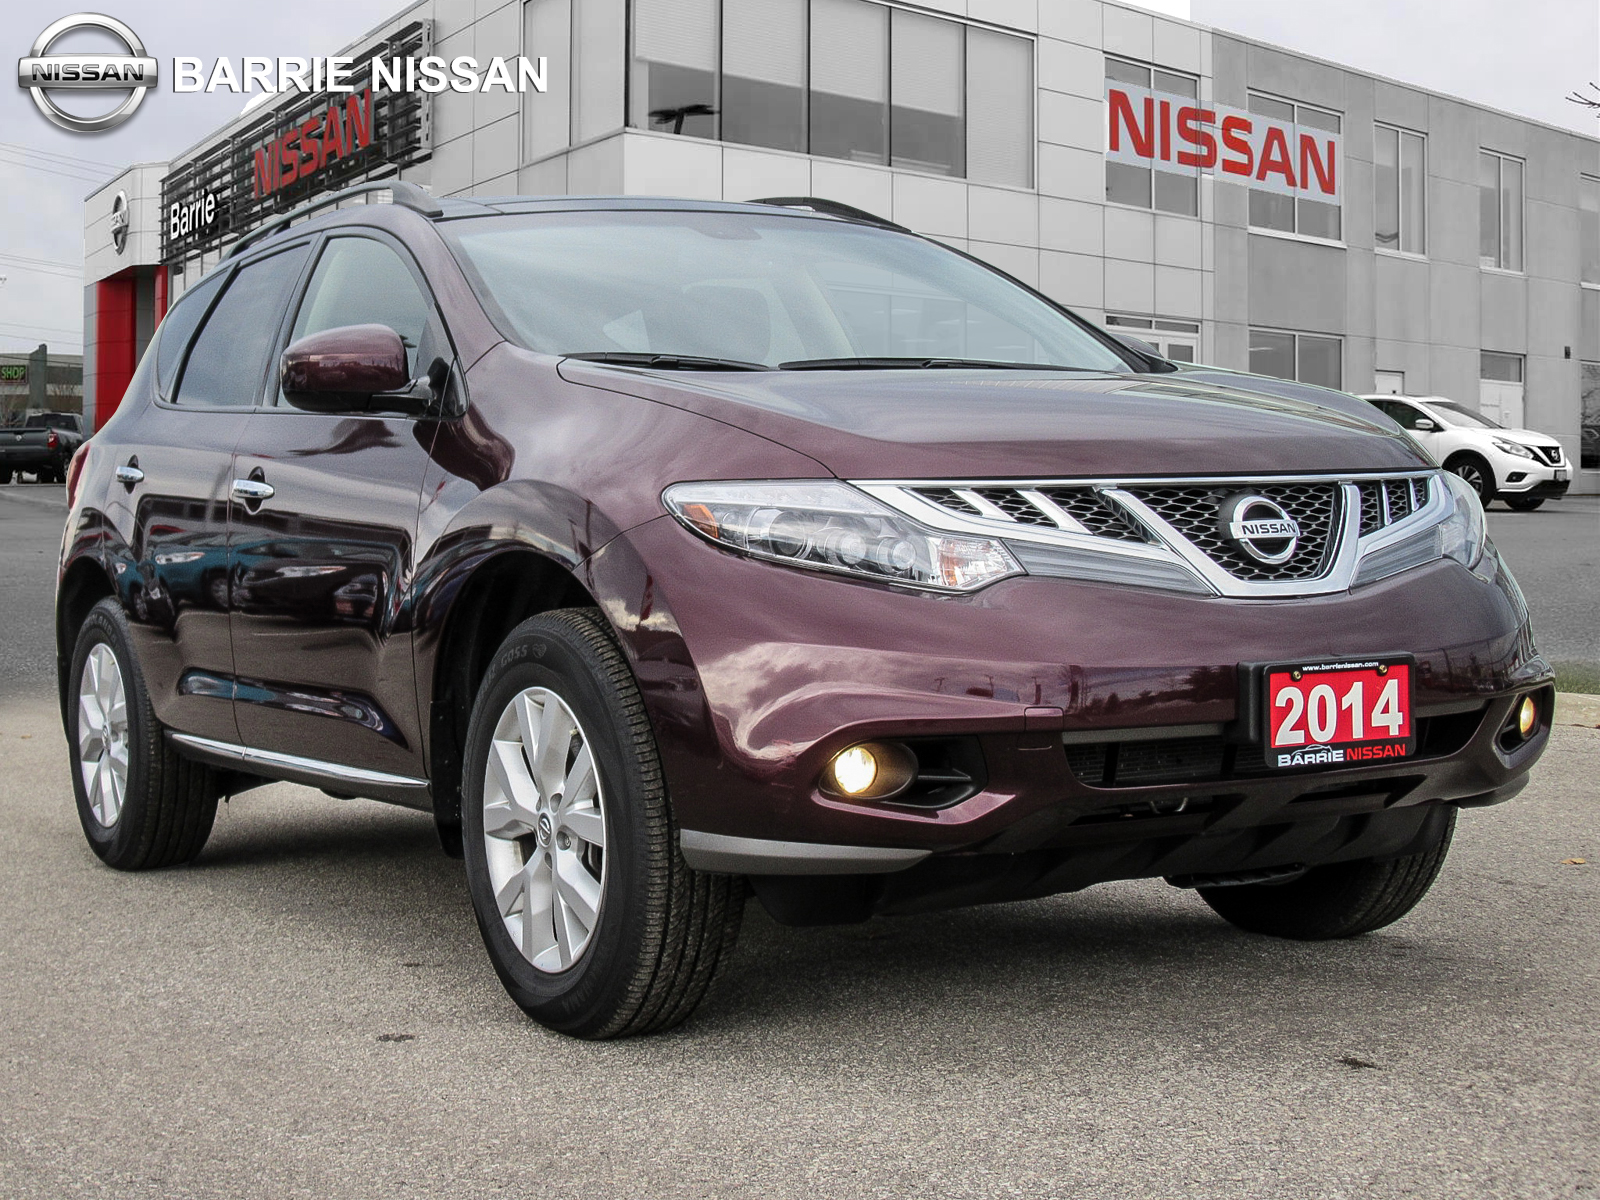 Used 2014 Nissan Murano in Barrie,ON